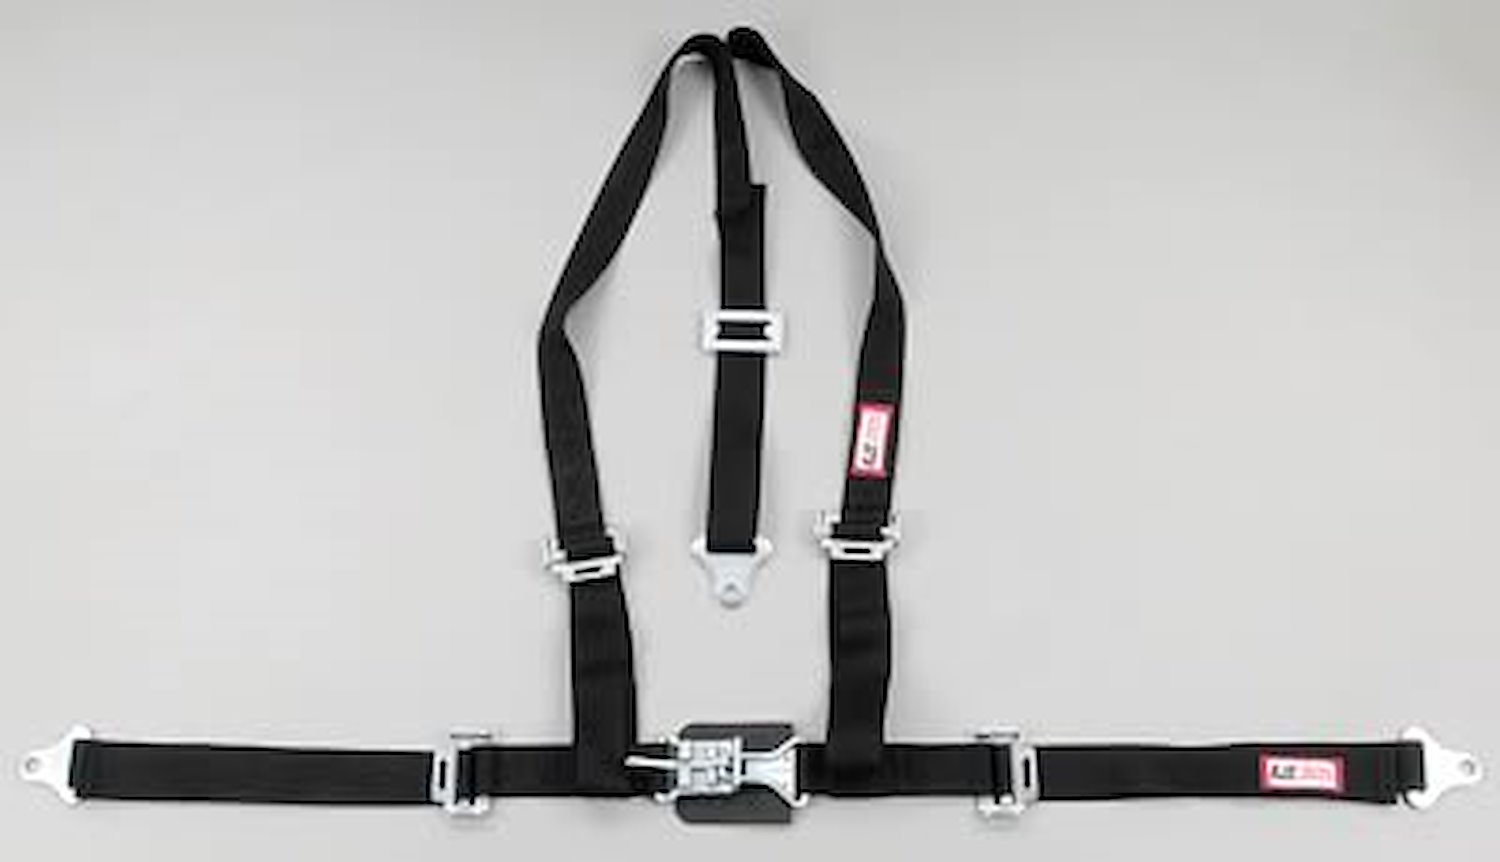 NON-SFI L&L HARNESS 2 PULL DOWN Lap Belt BOLT SEWN IN SEWN IN 2 S.H. INDIVIDUAL FLOOR Mount WRAP/BOLT RED